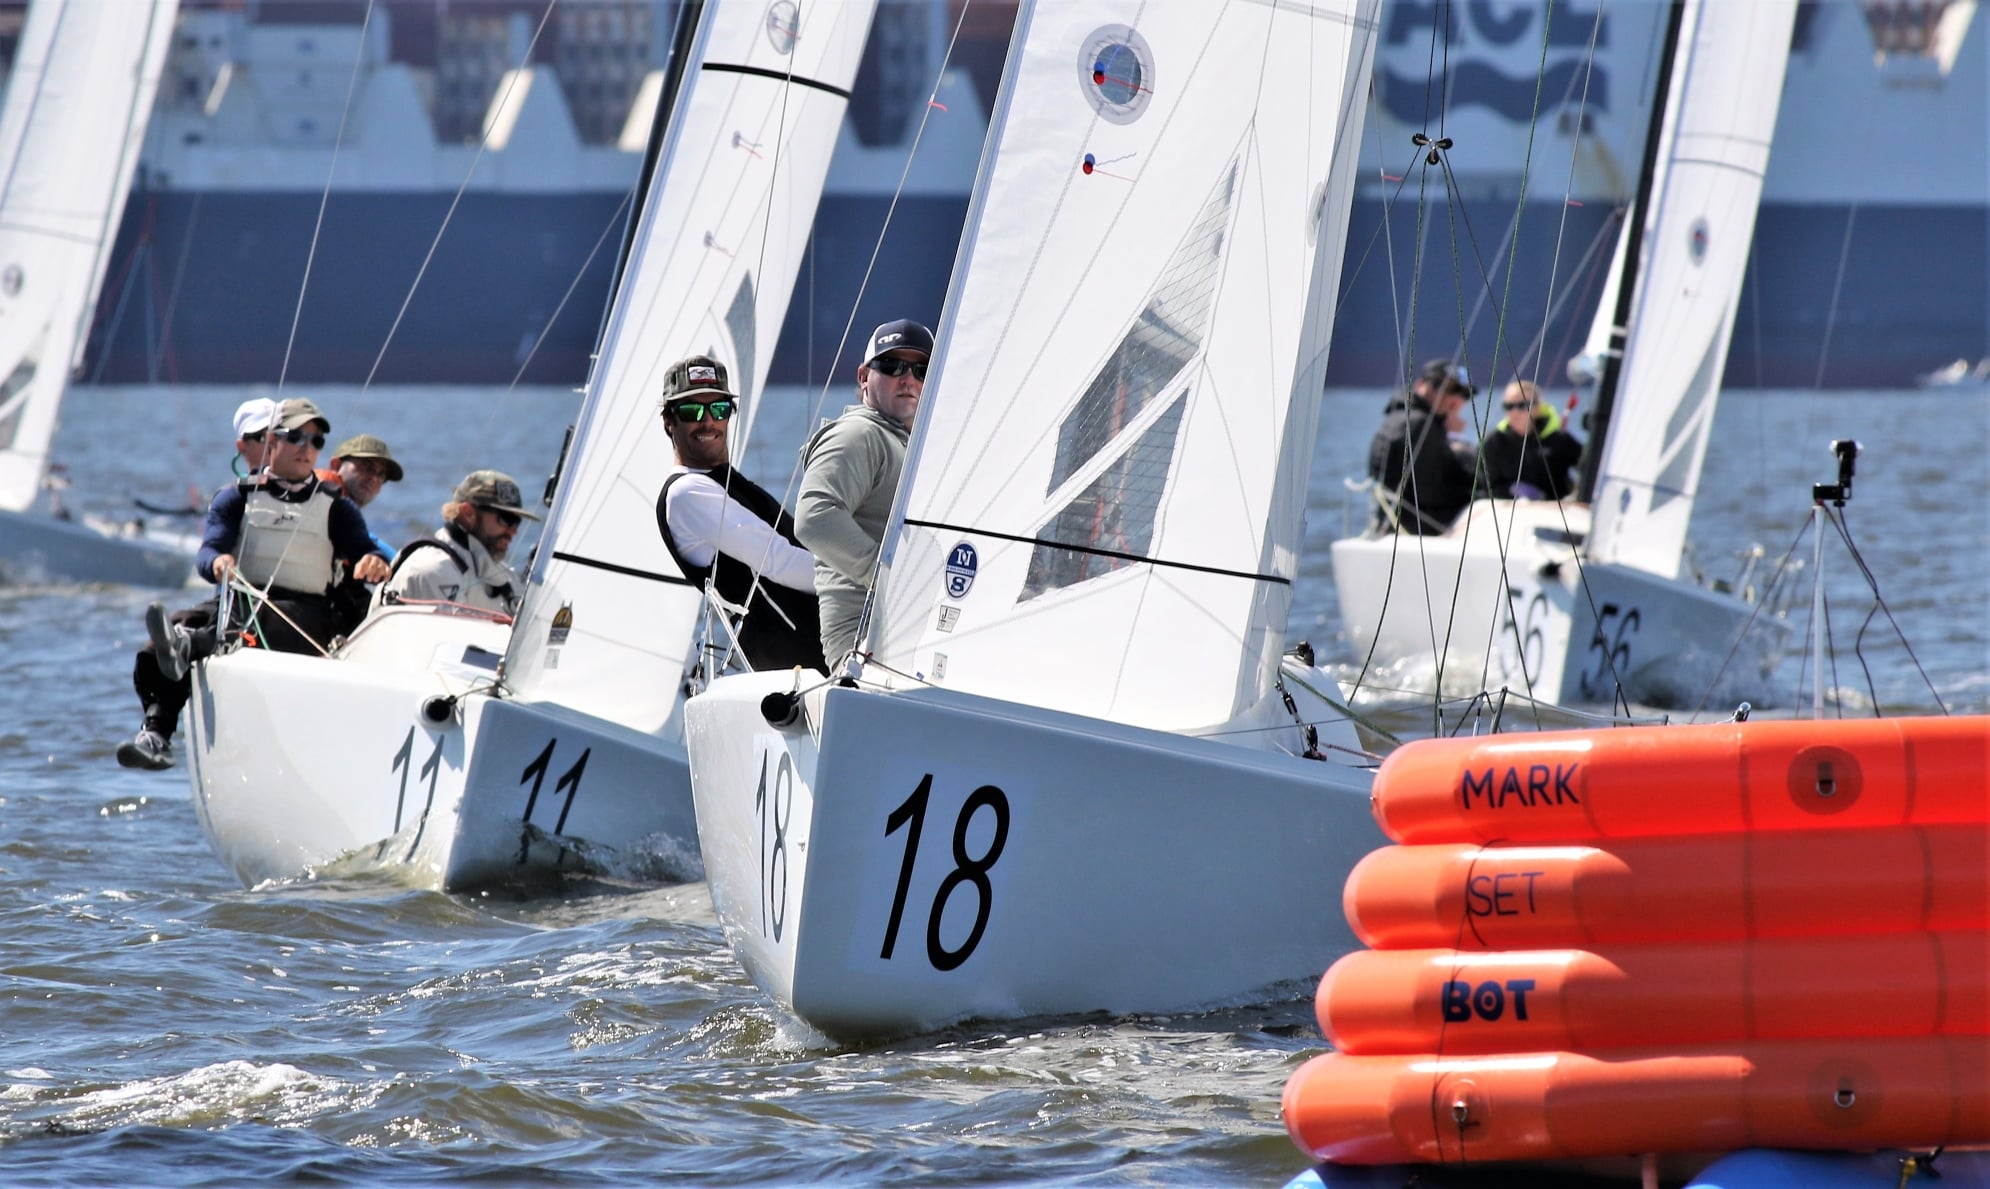  J/70  2021 North American Championship  Annapolis MD  Day 2  No wind, no racing  Peter Duncan leader before final  day